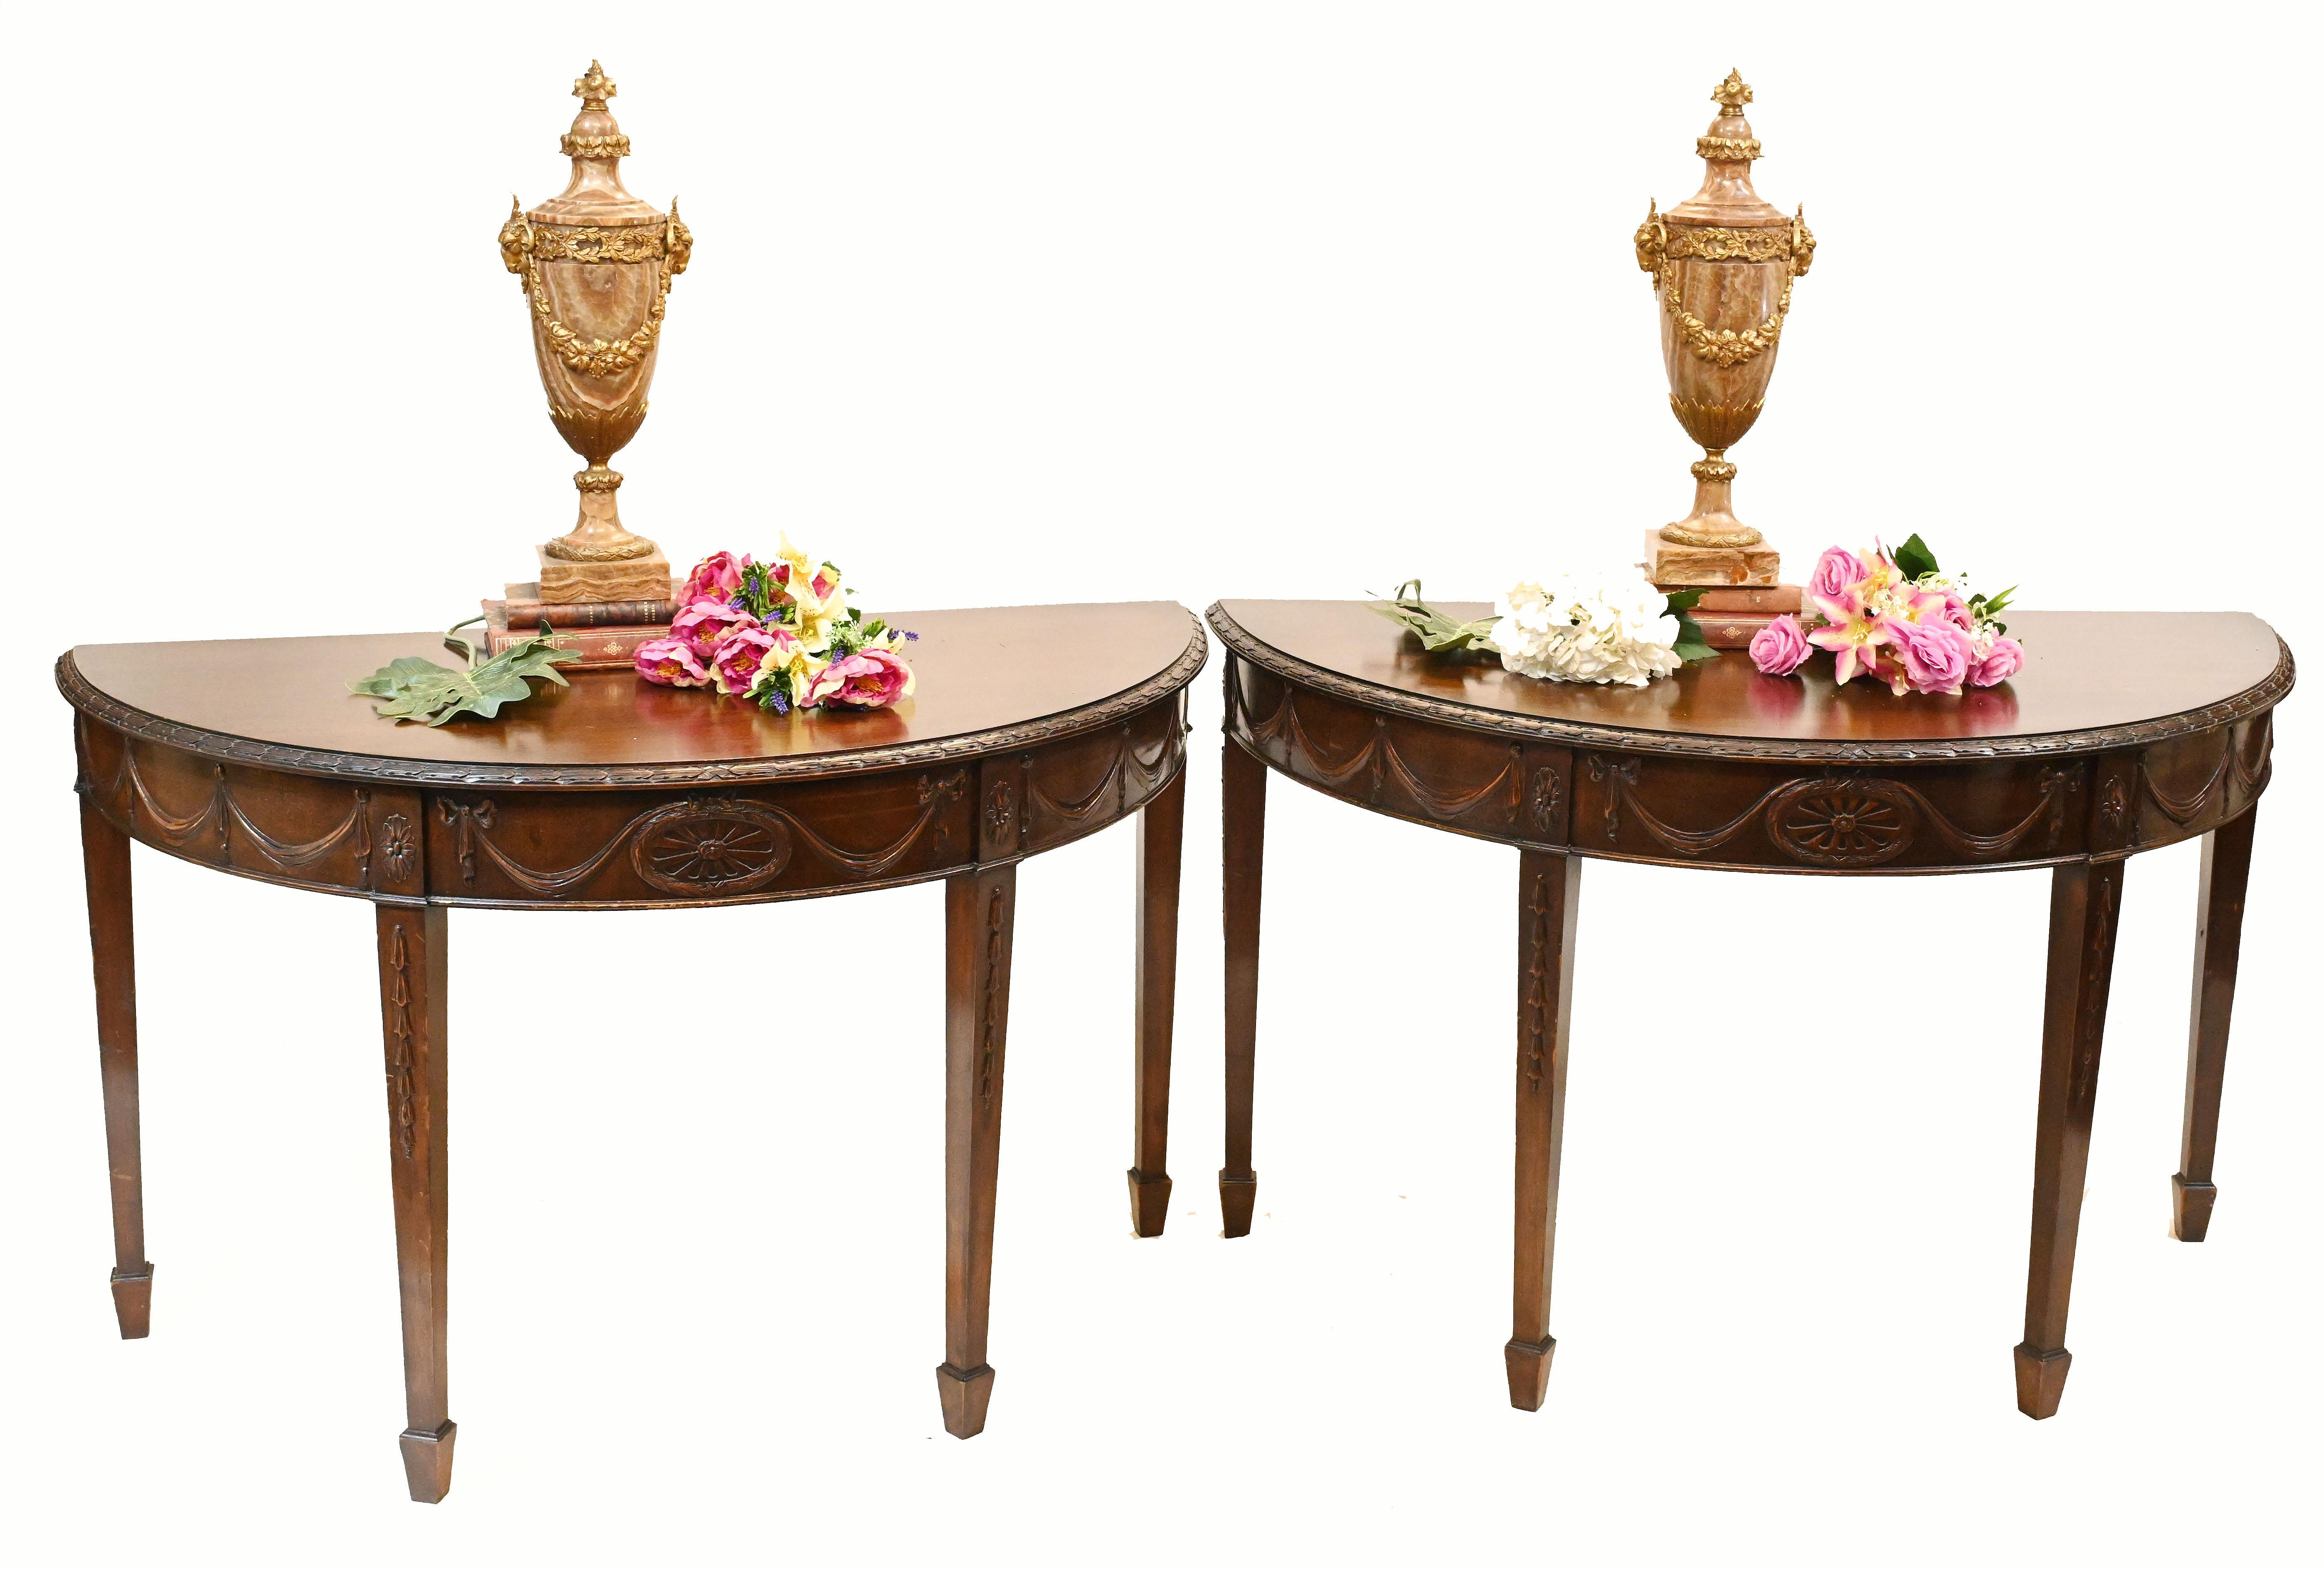 Elegant pair of antique console tables in the Adams manner
Feature raised carving - festoons, drapes - and we date these to circa 1880
Clean and minimal design, great for modern interiors
Great patina to the mahogany
Viewing by